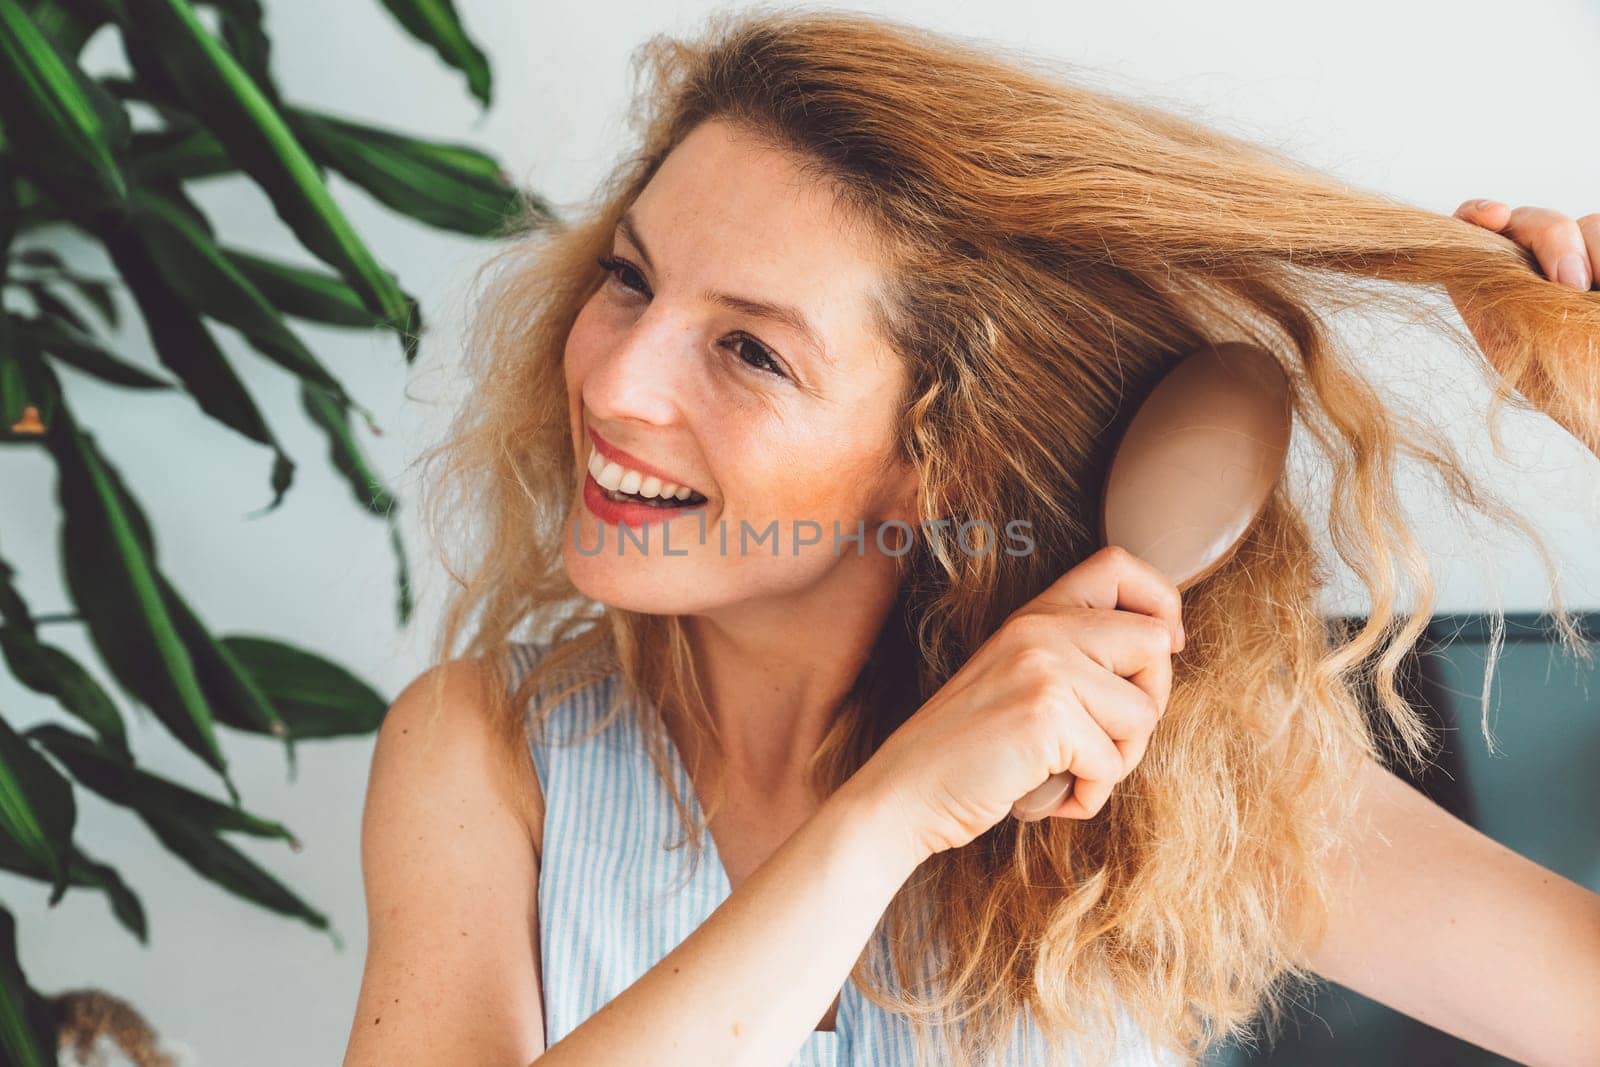 Waist up portrait smiling woman brushing her blonde curly hair with a hair brush by VisualProductions